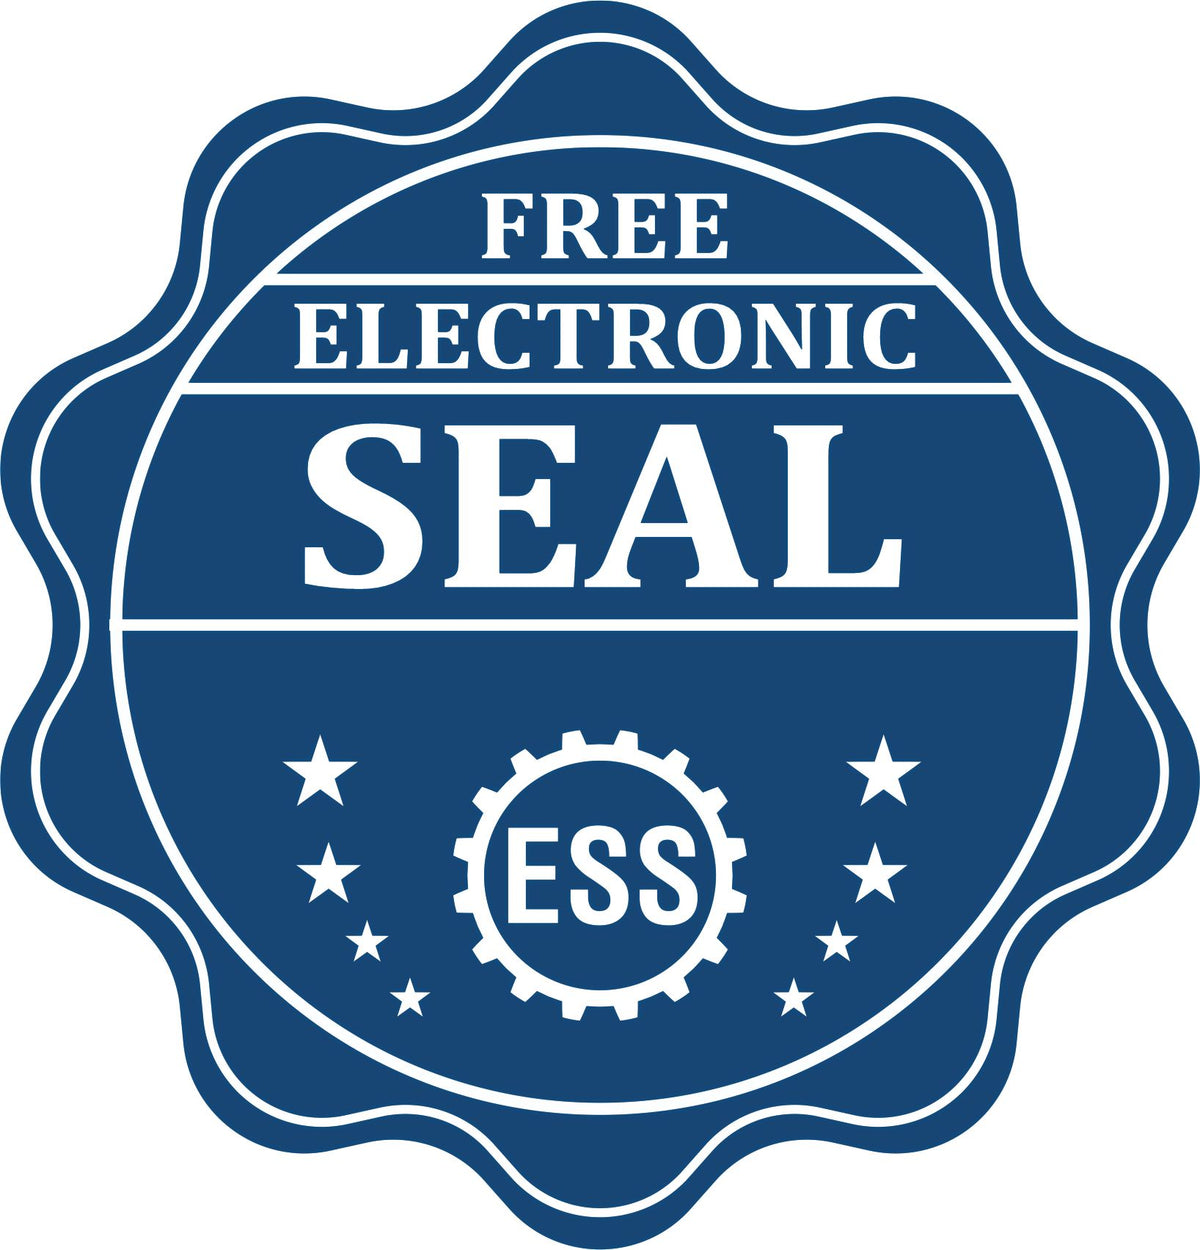 A badge showing a free electronic seal for the Hybrid South Carolina Landscape Architect Seal with stars and the ESS gear on the emblem.